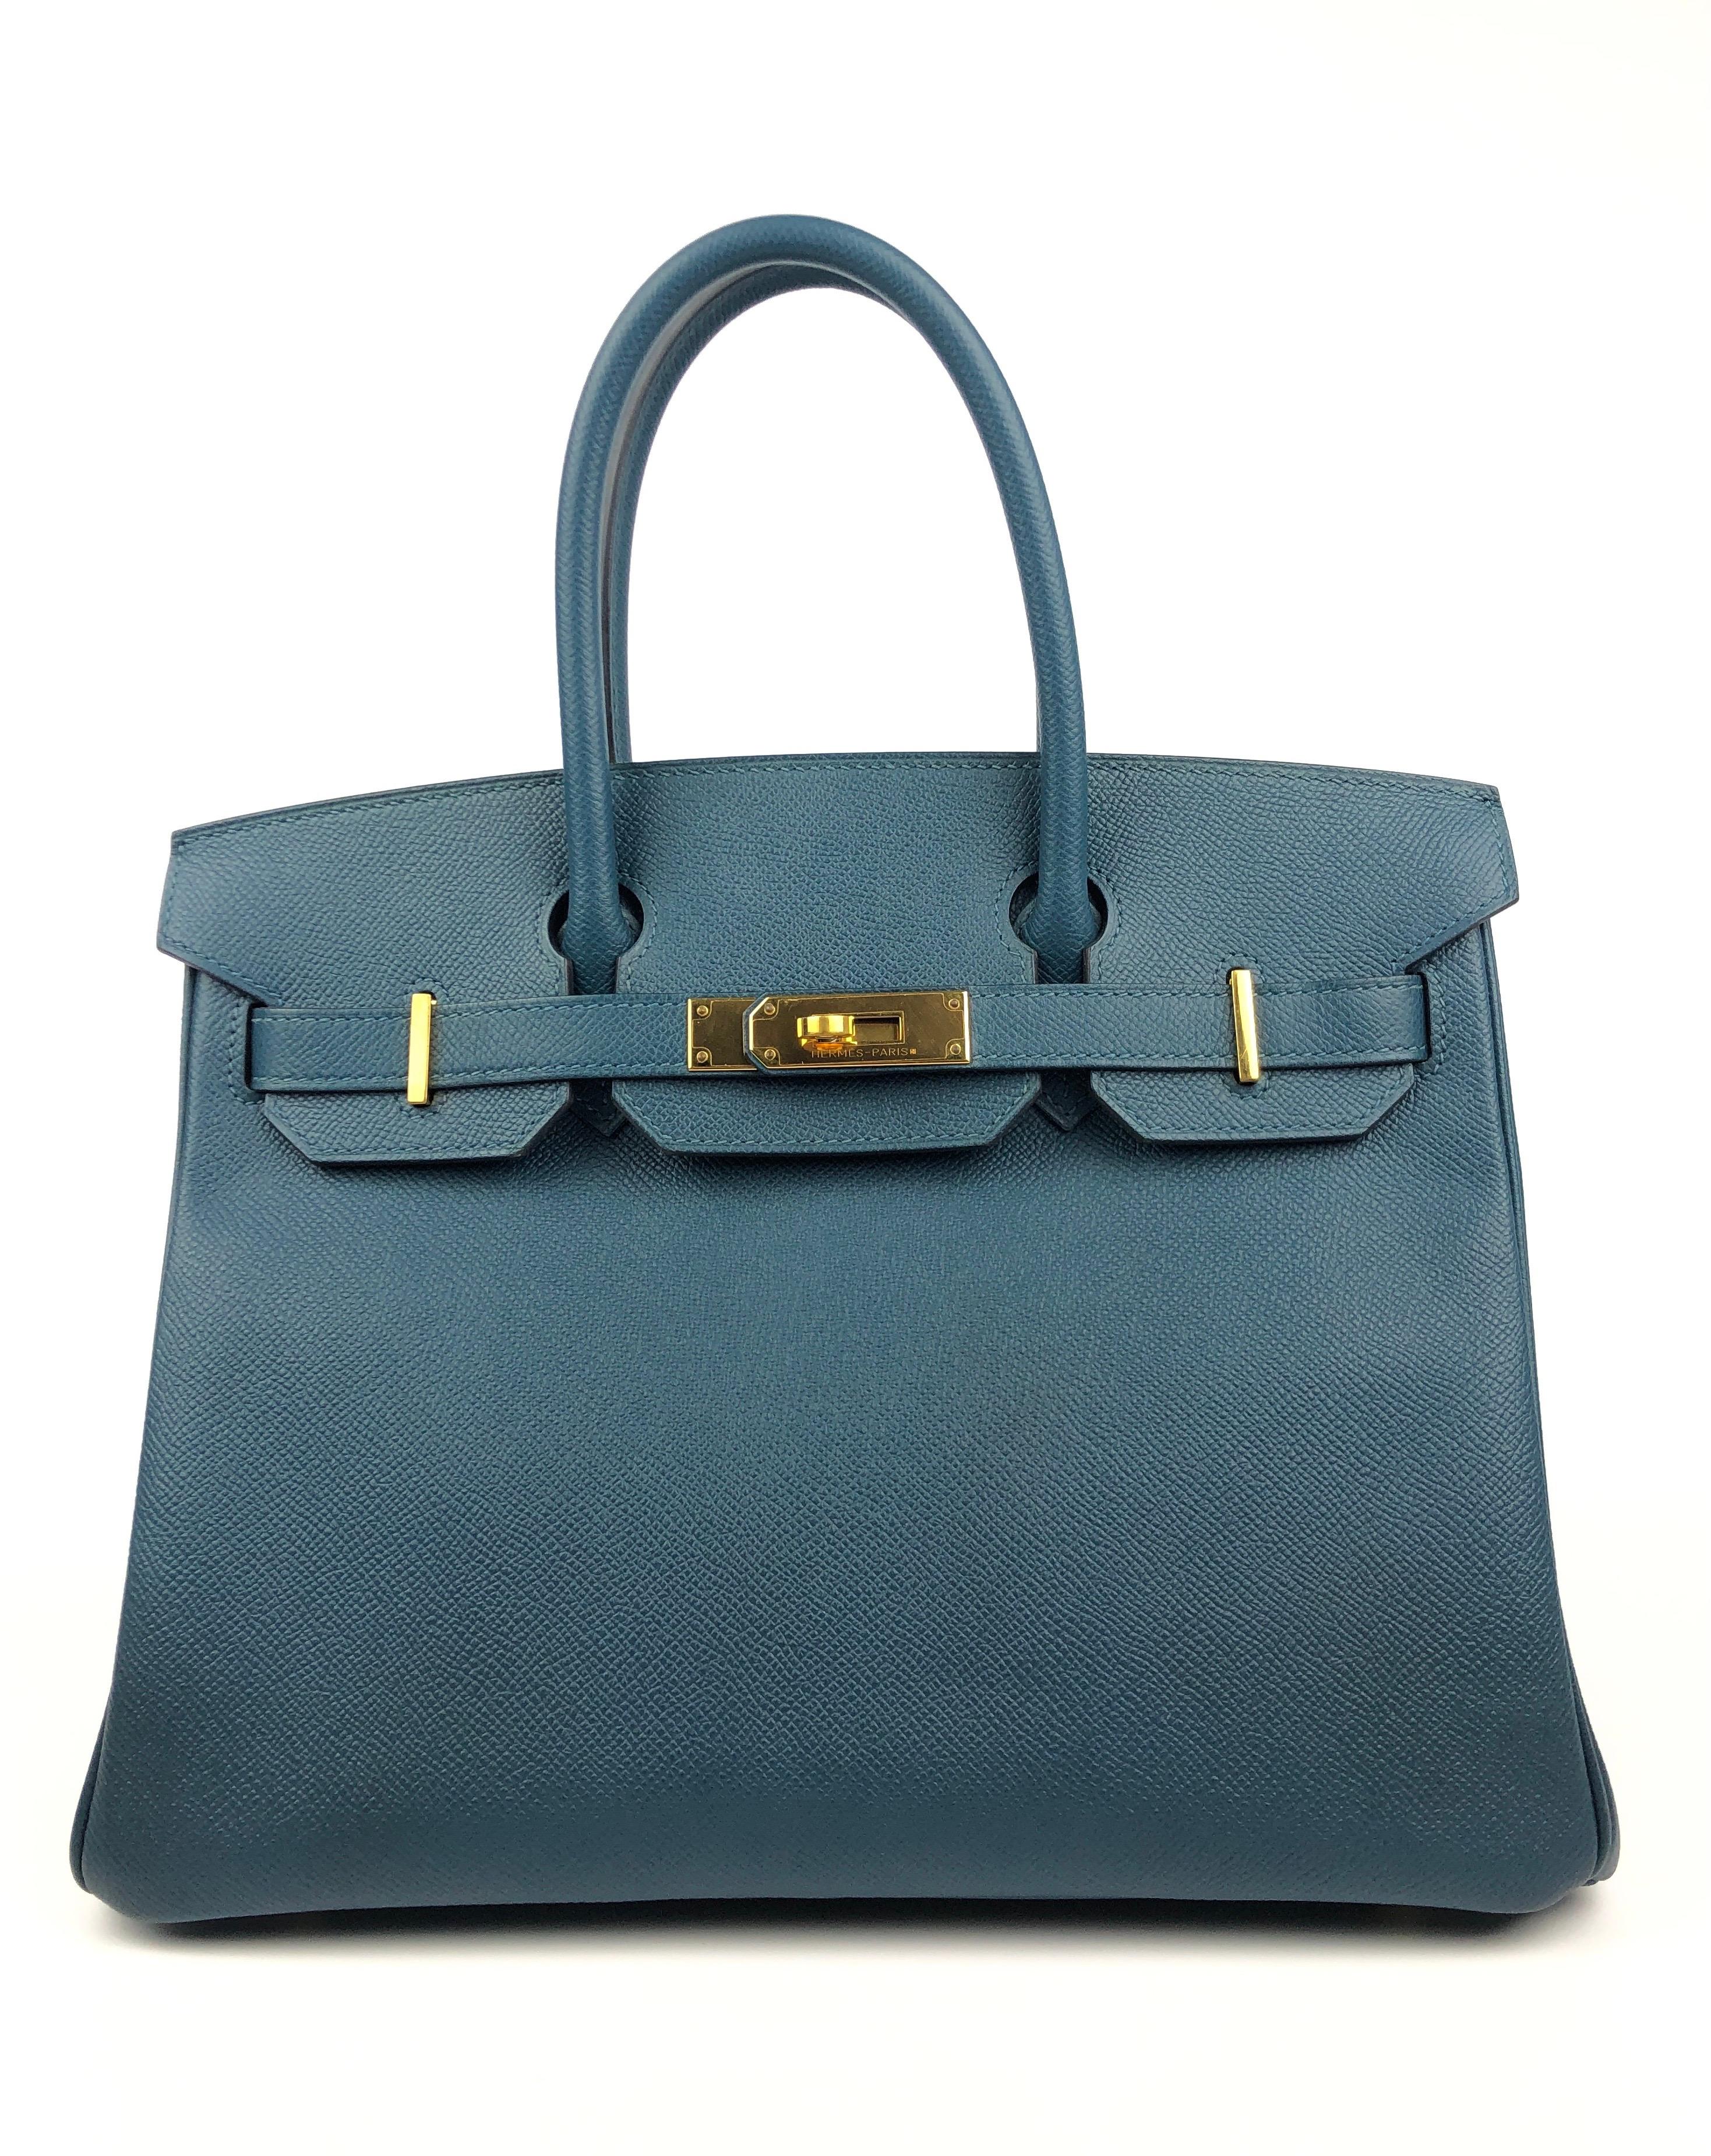 Stunning Rare Hermes Birkin 30 Blue Colvert Gold Hardware.  Excellent Pristine Condition, Plastic on Hardware. Excellent corners and Structure.

Shop with Confidence from Lux Addicts. Authenticity Guaranteed. 